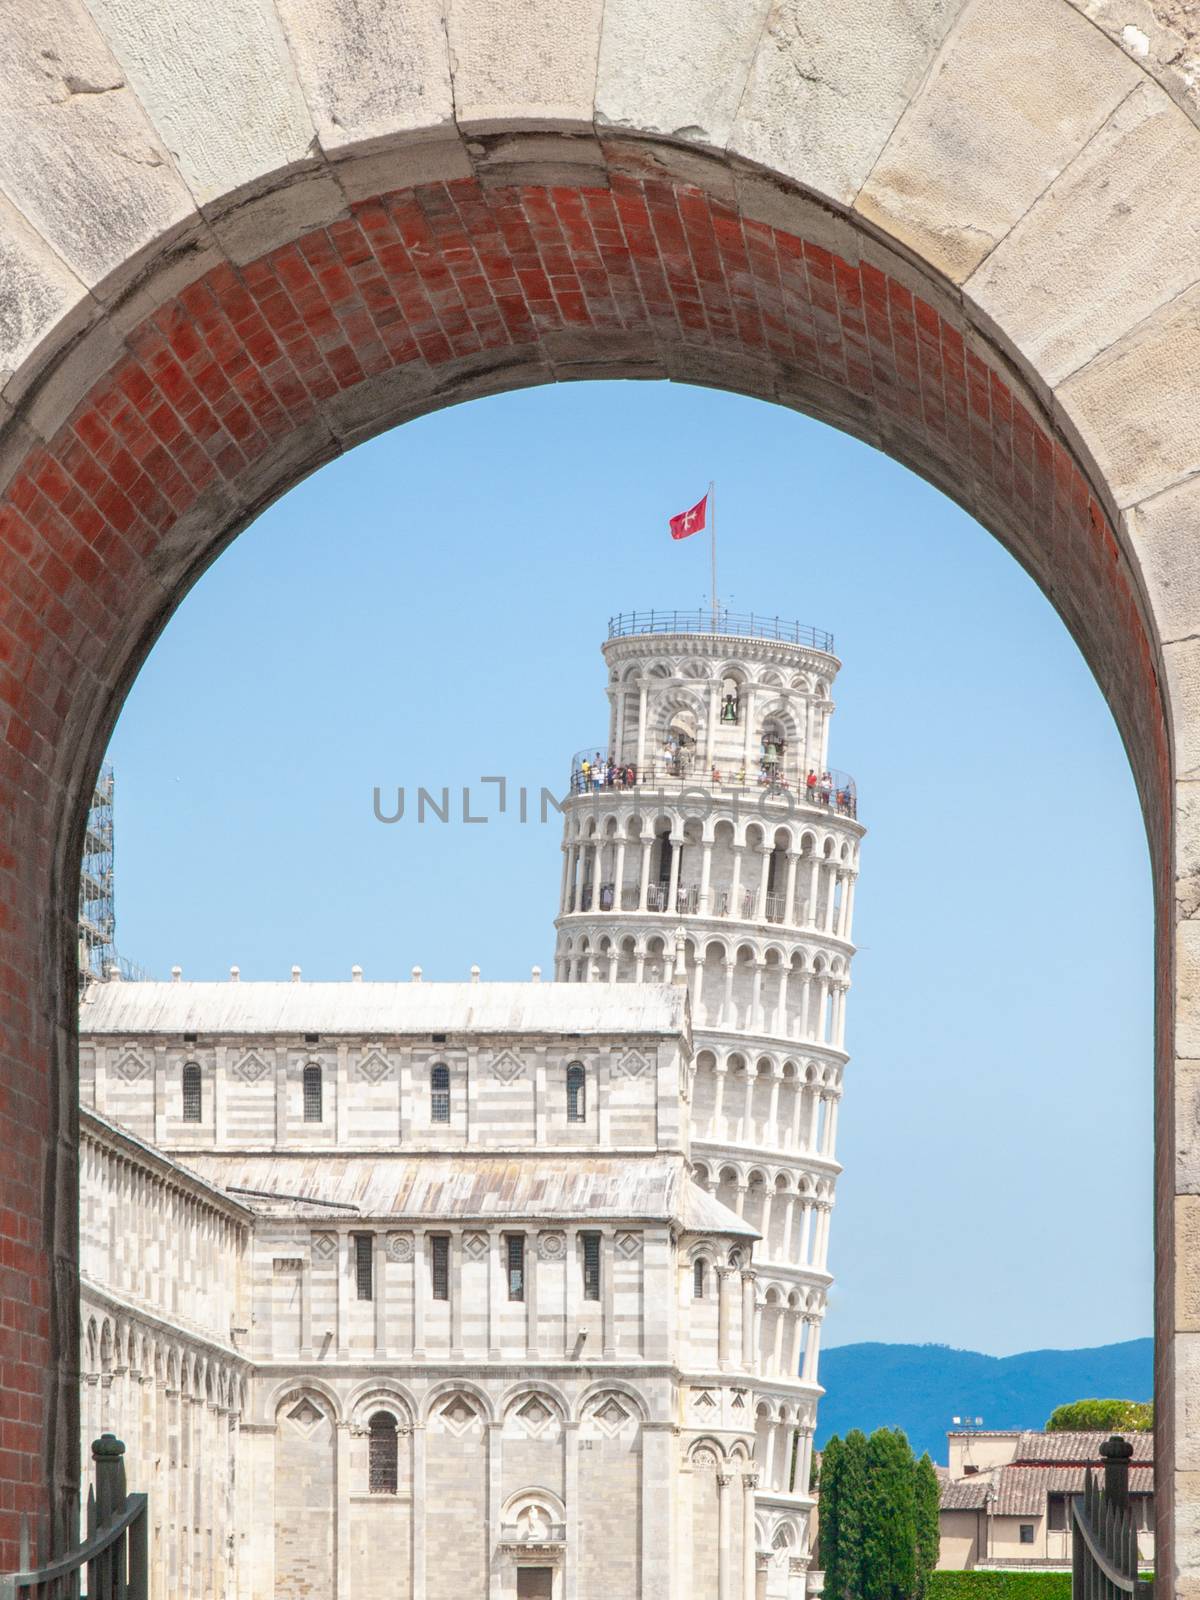 Leaning Tower in Pisa, Torre pendente di Pisa. View through arch of New Gate, Porta Nuova. Tuscany, Italy, UNESCO World Heritage Site by pyty